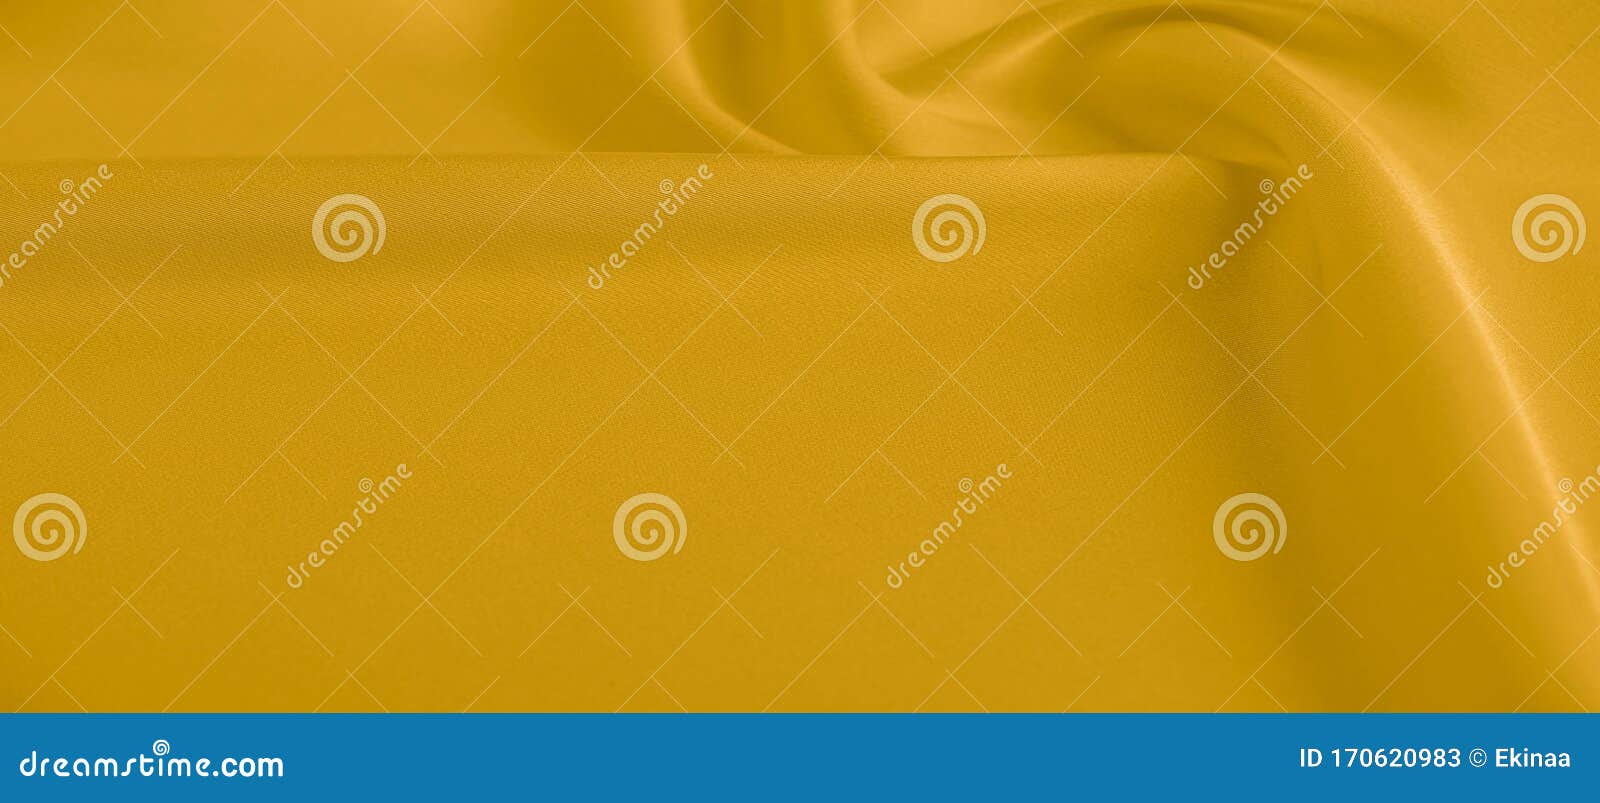 background texture, pattern. yellow silk fabric. a very light faux dupioni silk fabric with rich drape and slub texture with a